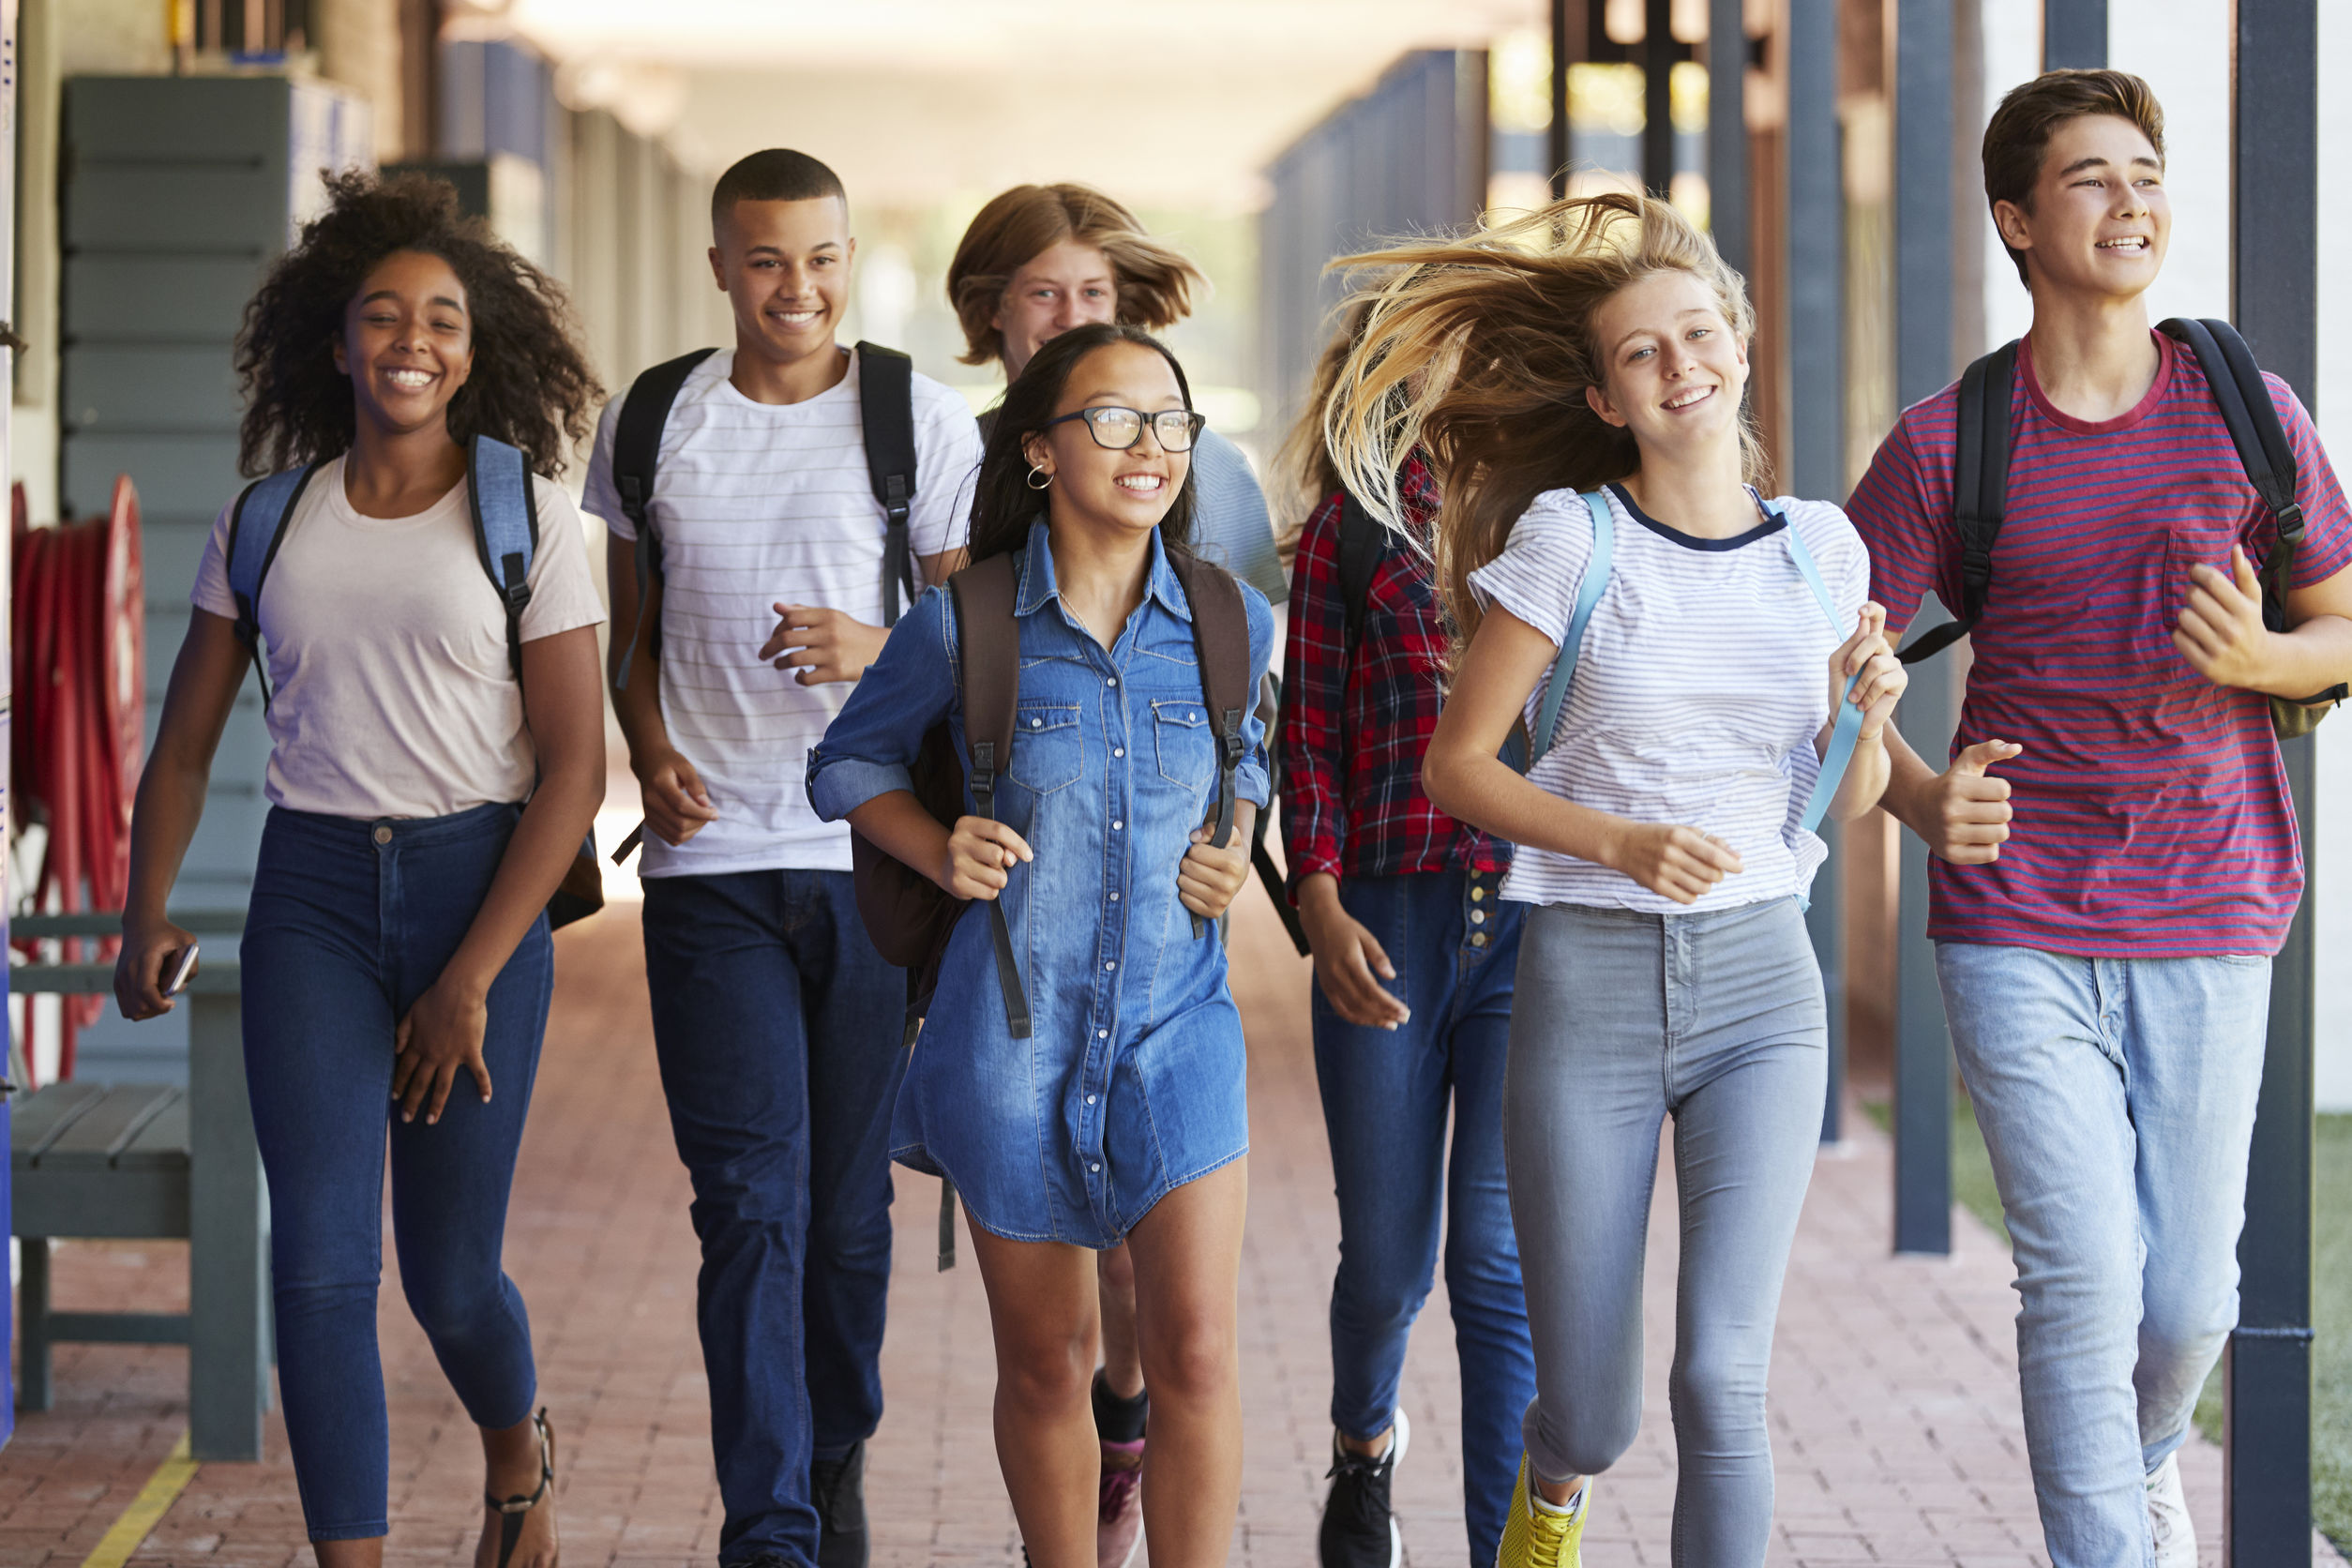 A group of teenagers walking together through a school.